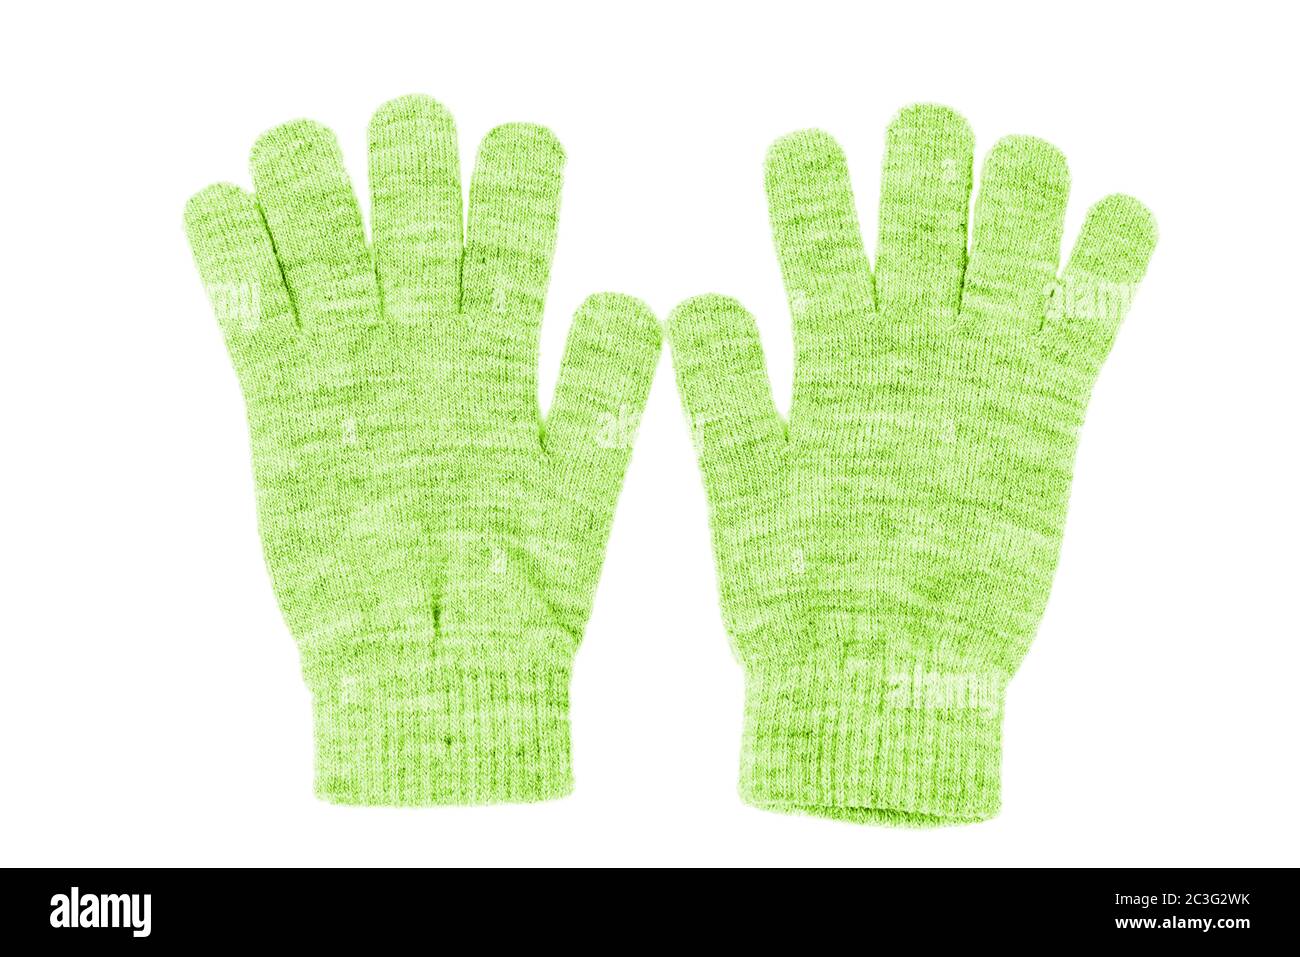 Wool gloves isolated Stock Photo